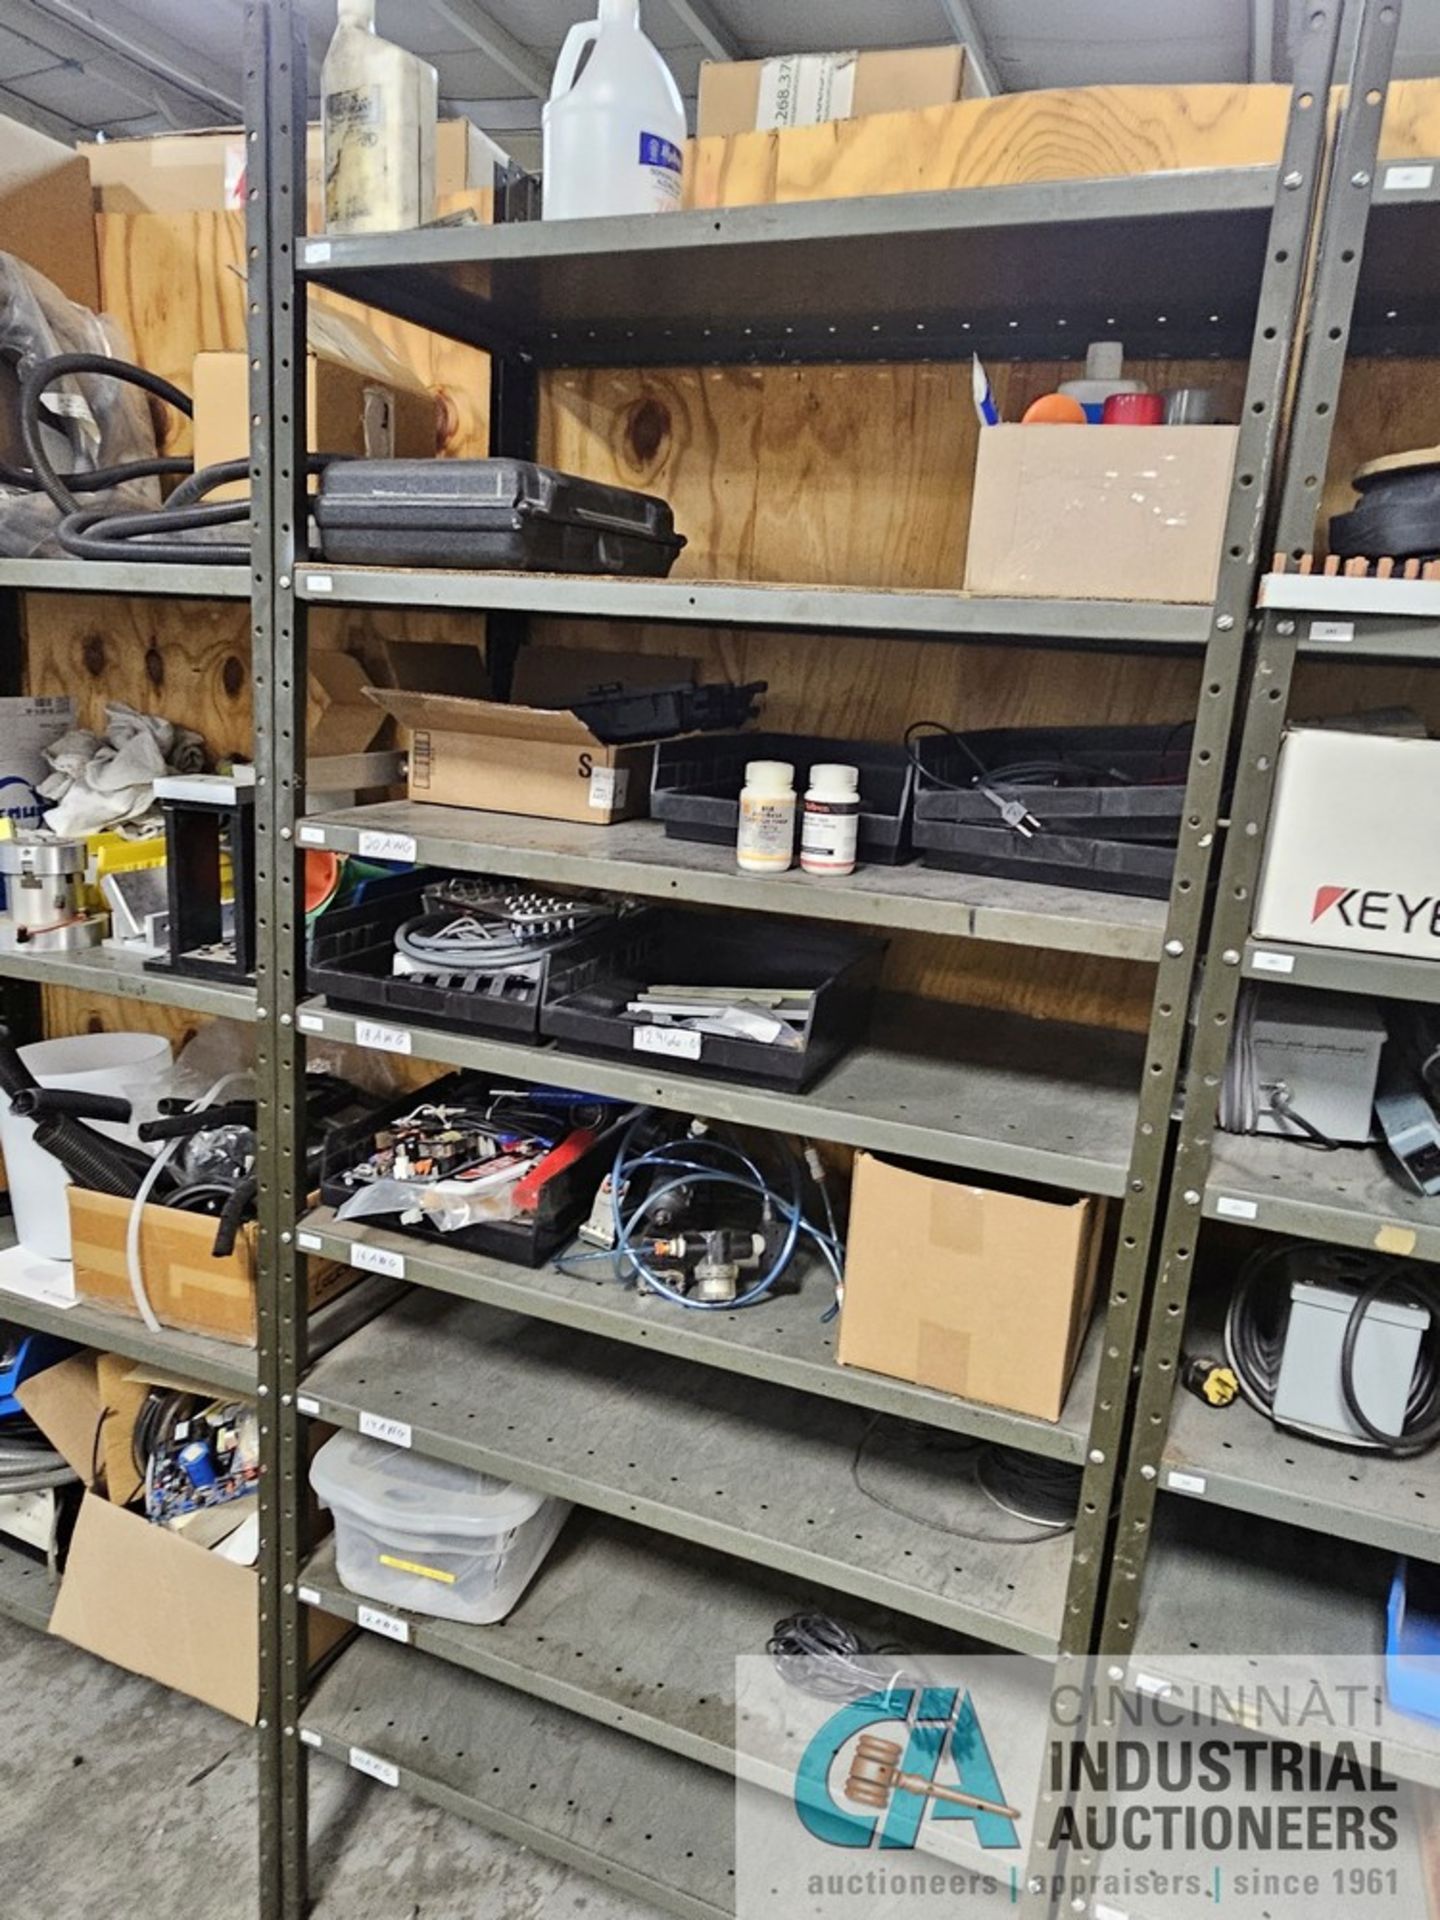 SECTIONS STEEL SHELVING WITH CONTENTS; ELECTRIC PARTS AND MISCELLANEOUS TOOLTEX ITEMS - Image 4 of 6